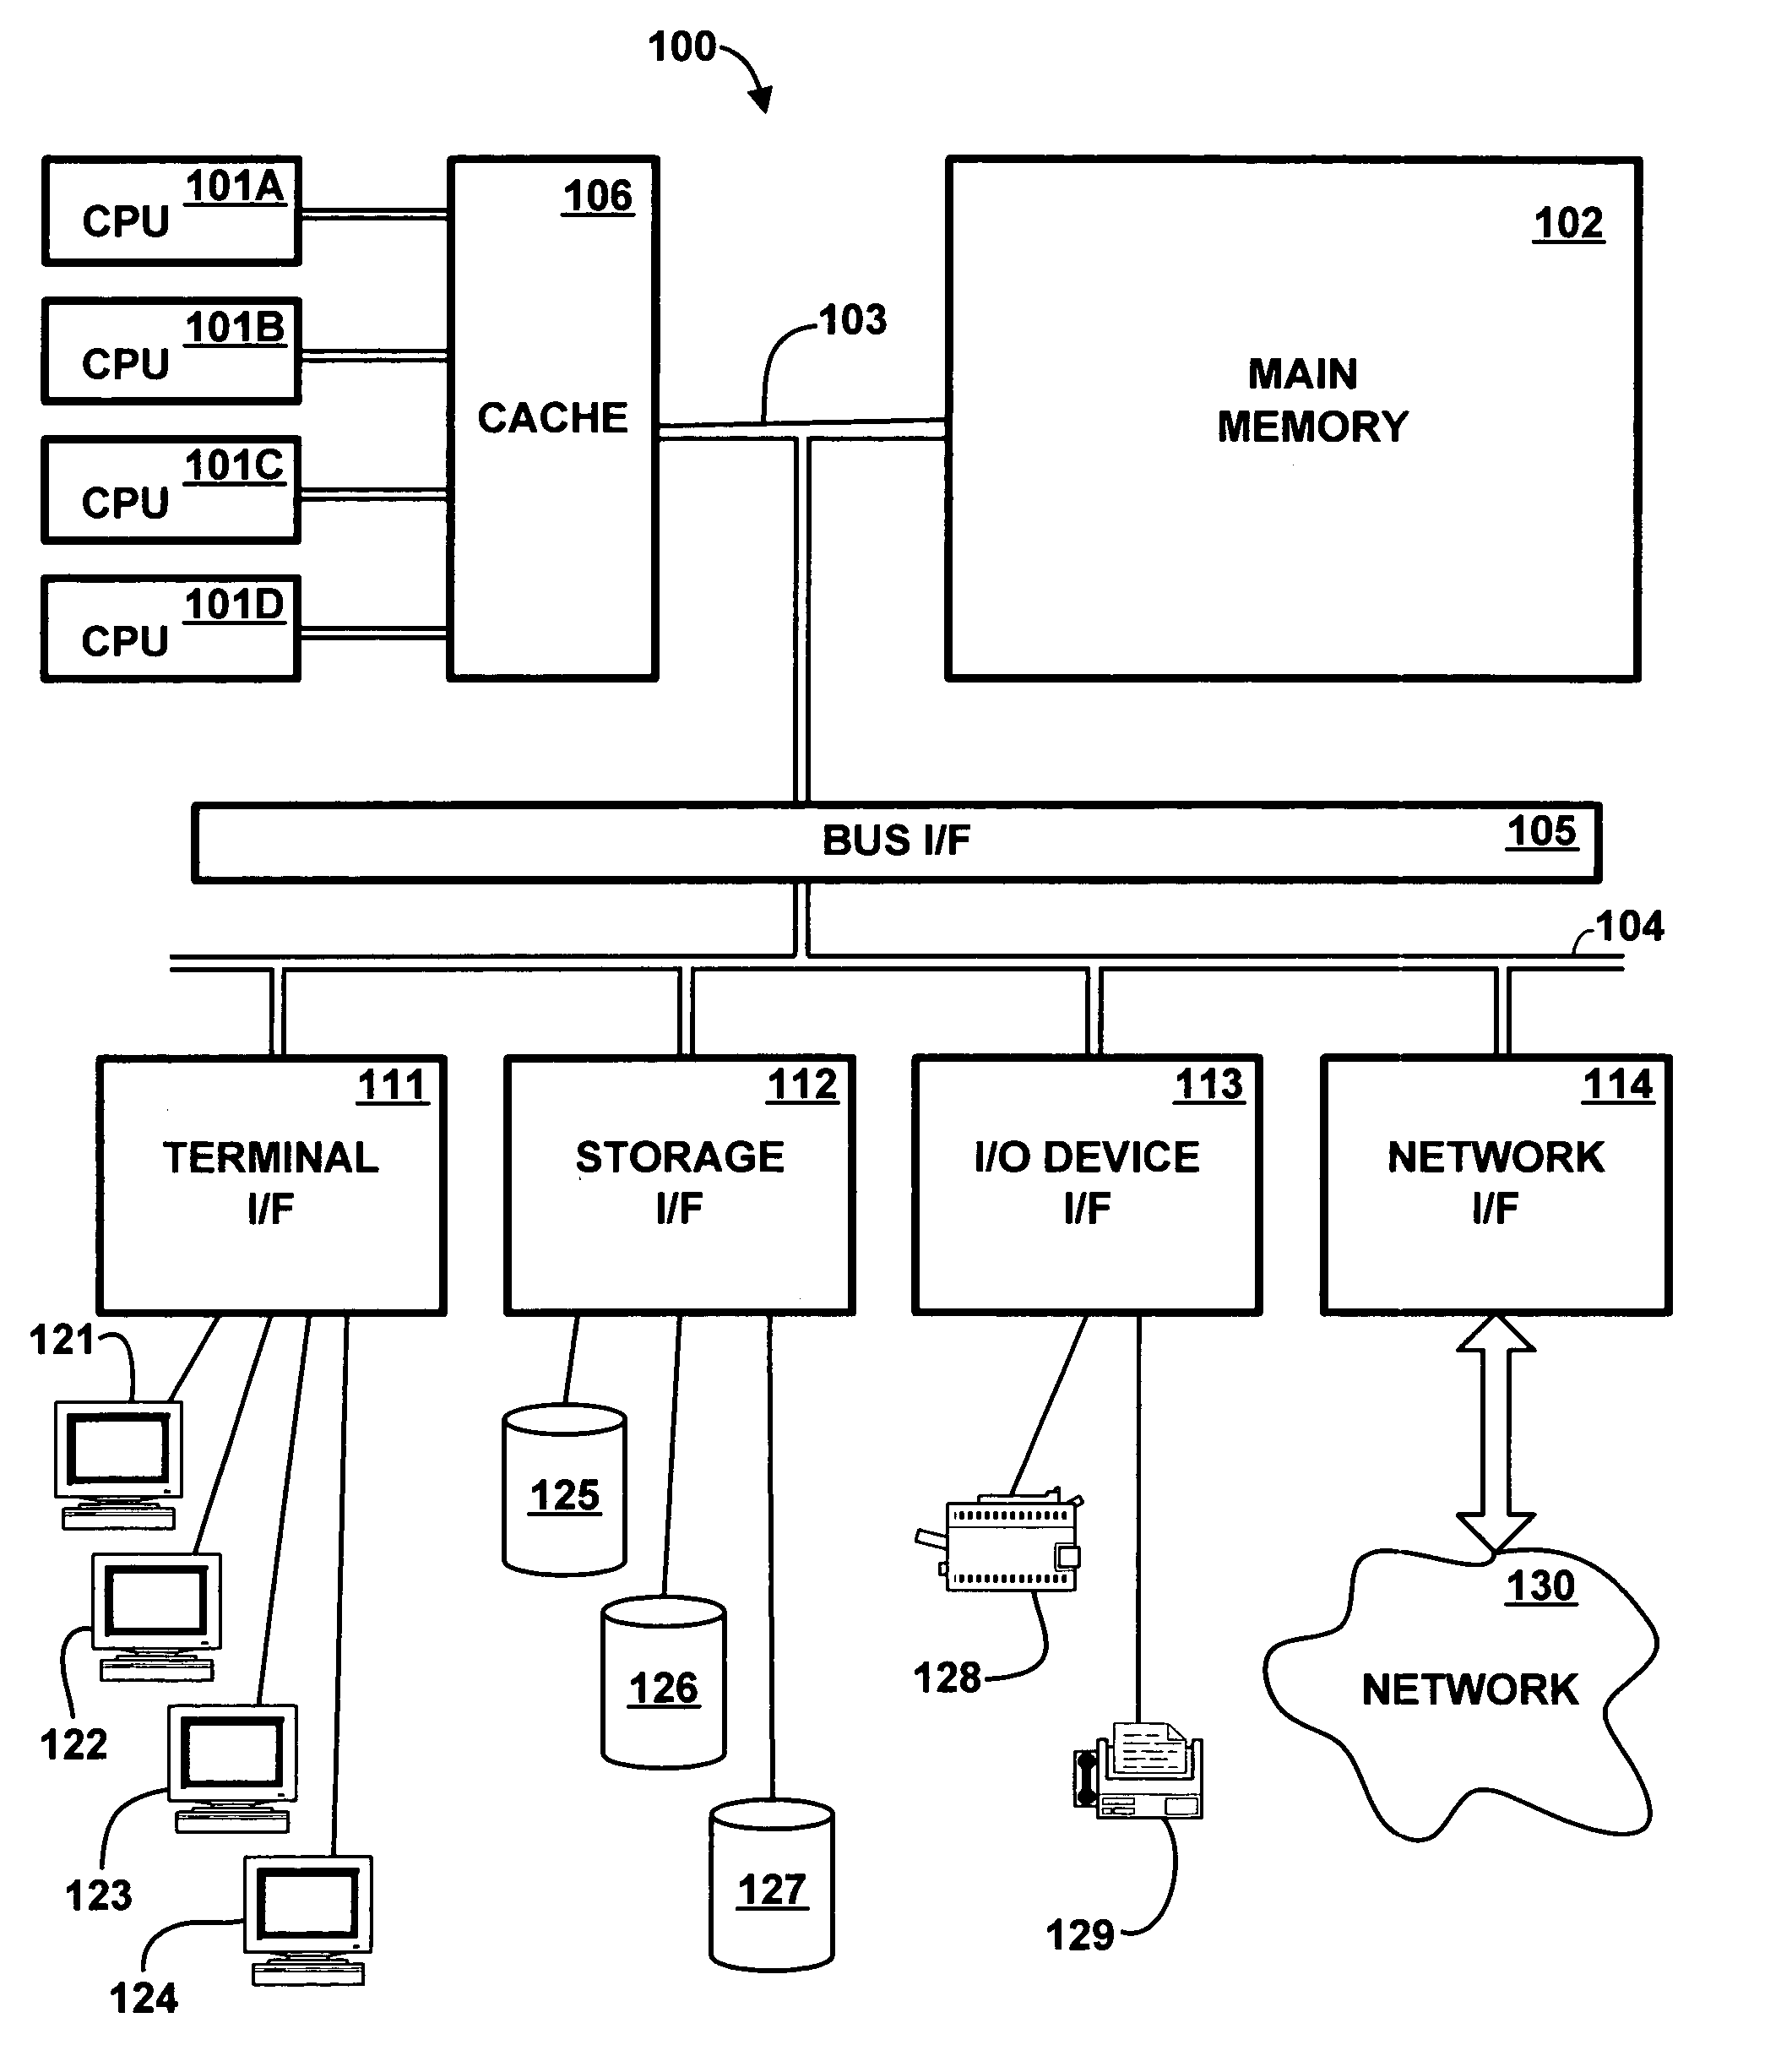 Multi-level cache having overlapping congruence groups of associativity sets in different cache levels